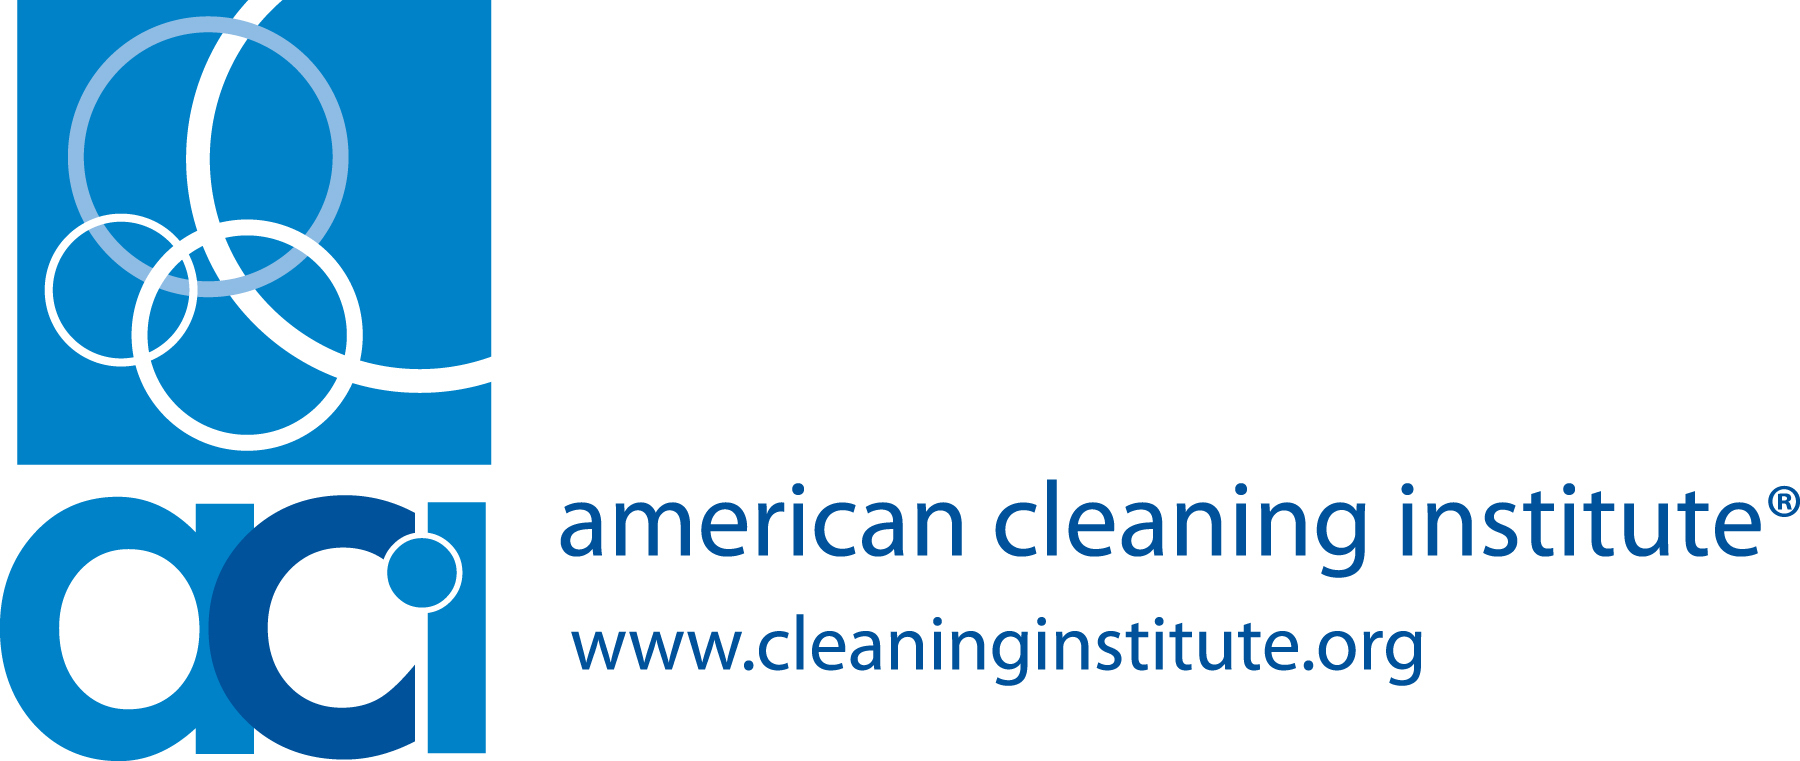 Cleaning the Refrigerator  The American Cleaning Institute (ACI)